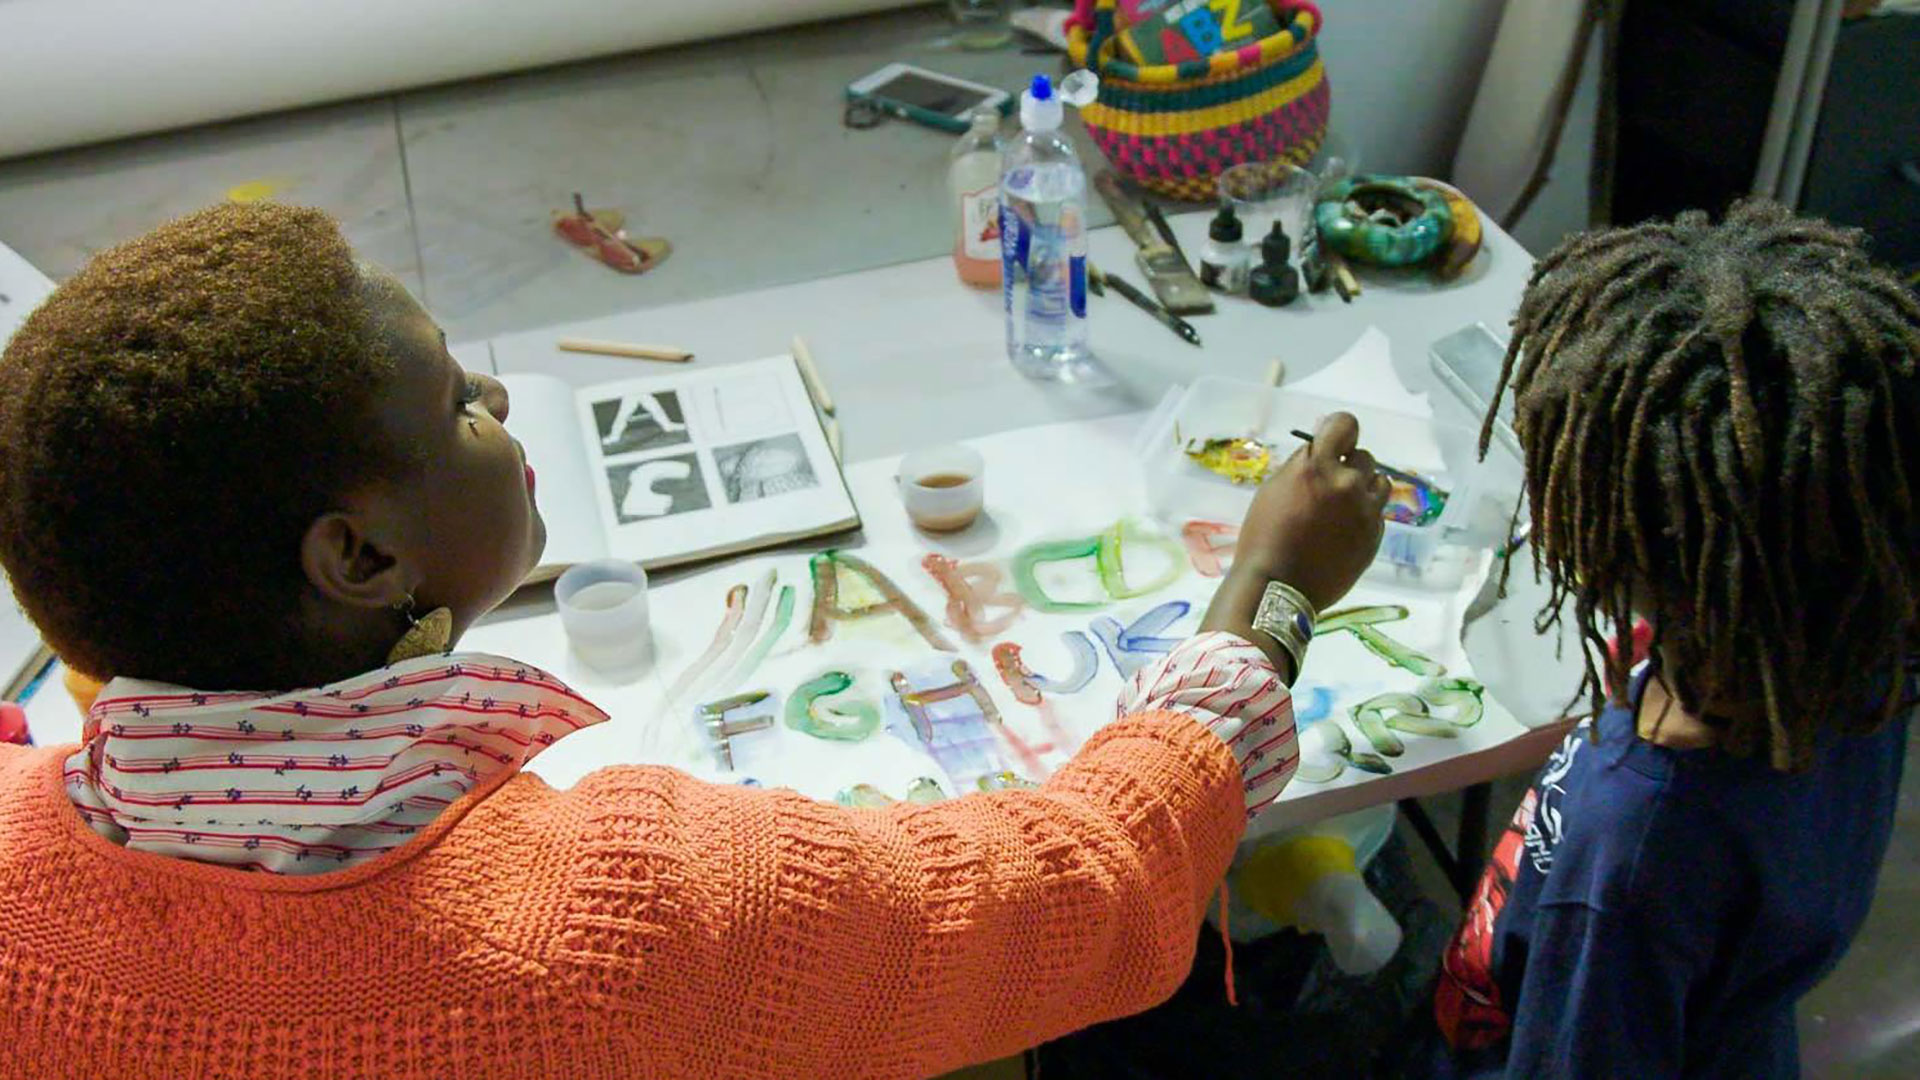 A person dips a brush into paint as a child watches next to them.